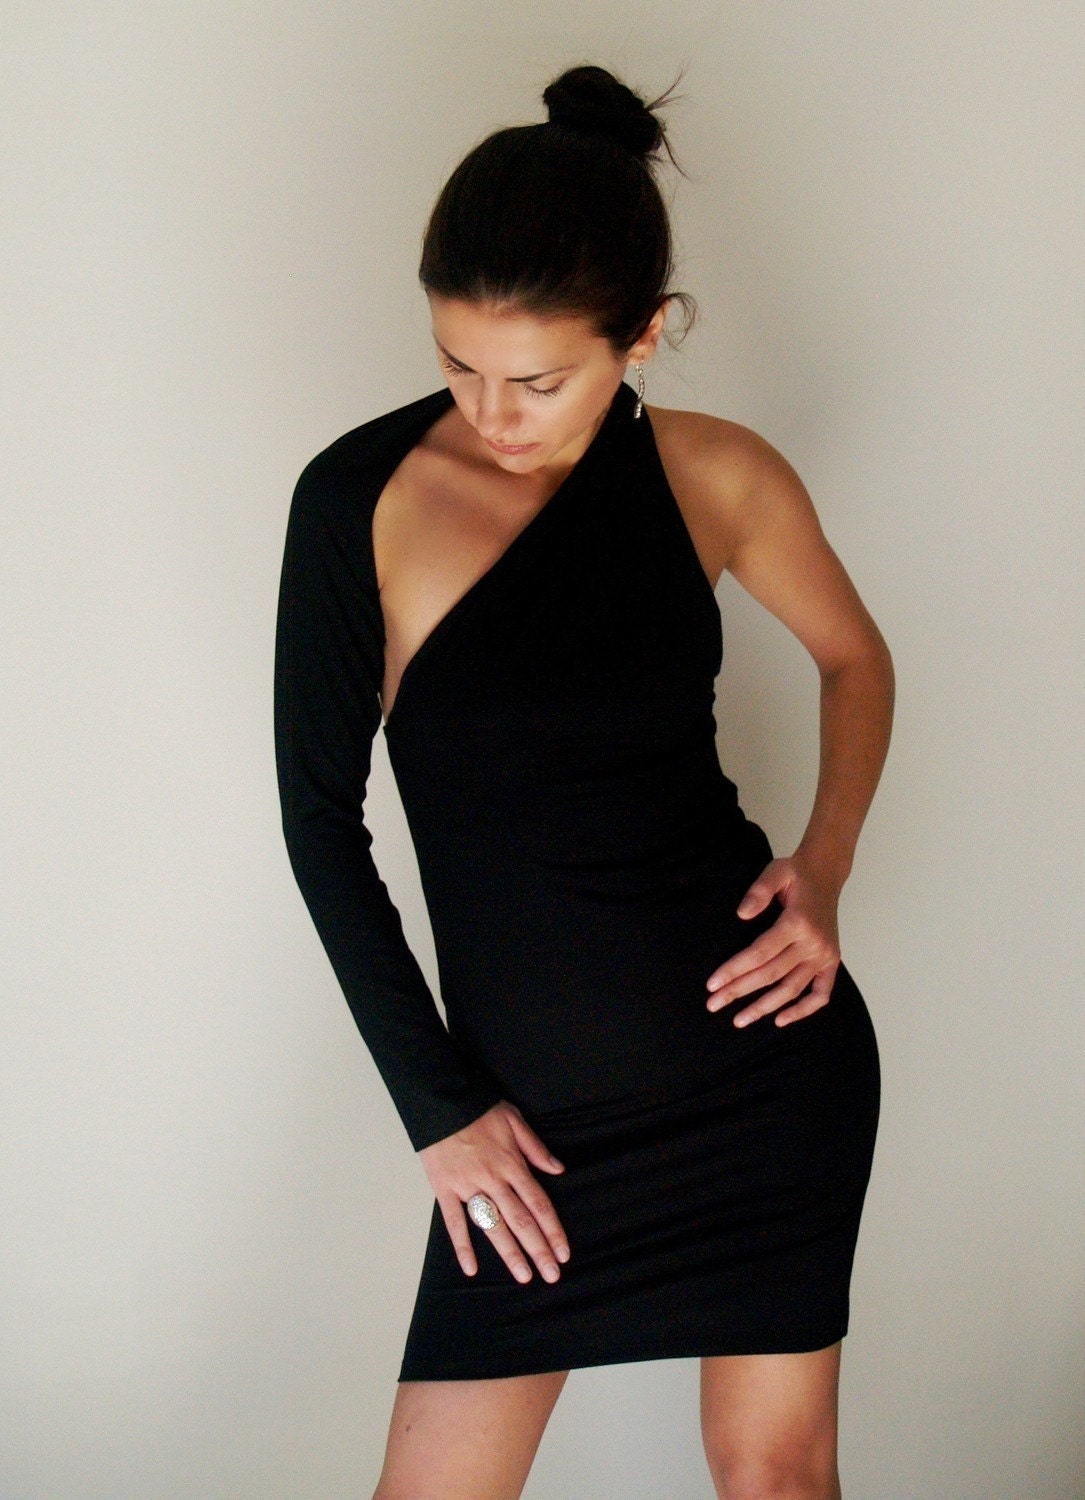 Black Party Dress Fitted One shoulder Mini Dress - Free US Shipping - Donation to UNICEF - Item MM-DRT1100B4